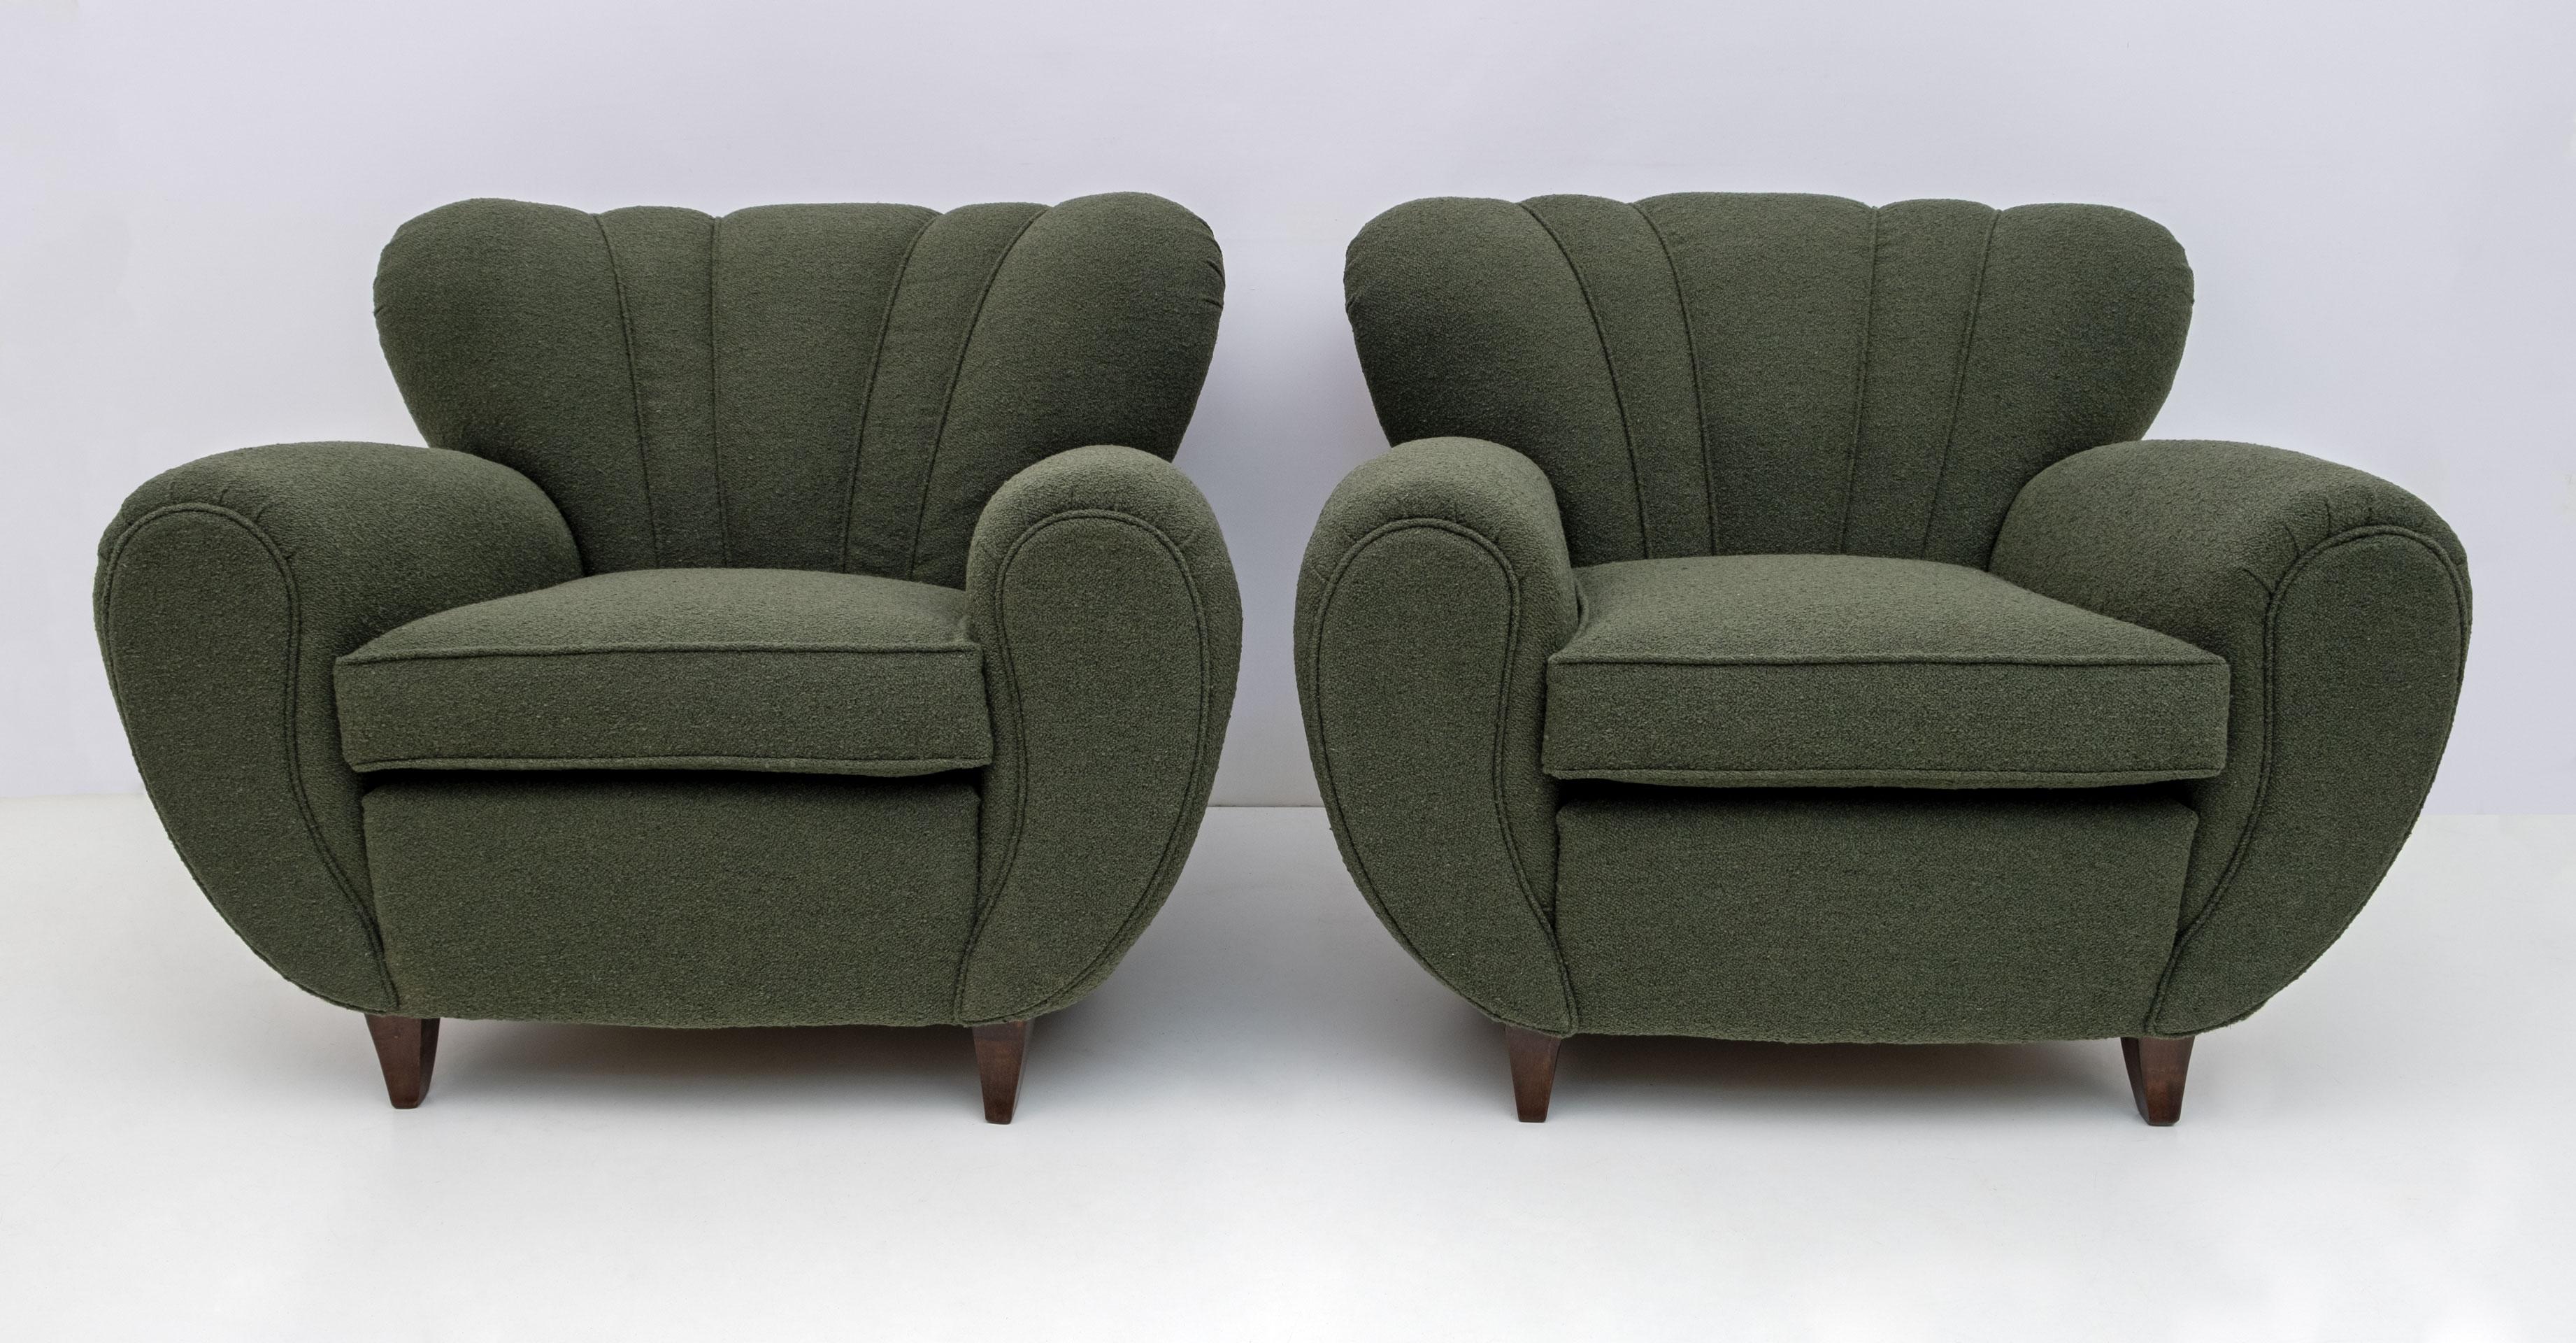 Pair of Italian sculptural armchairs designed attributed Guglielmo Ulrich, very comfortable. Recently covered in green Bouclè, finished with a border of the fabric itself, in order to accentuate the curved shapes. The tapered and curved feet in